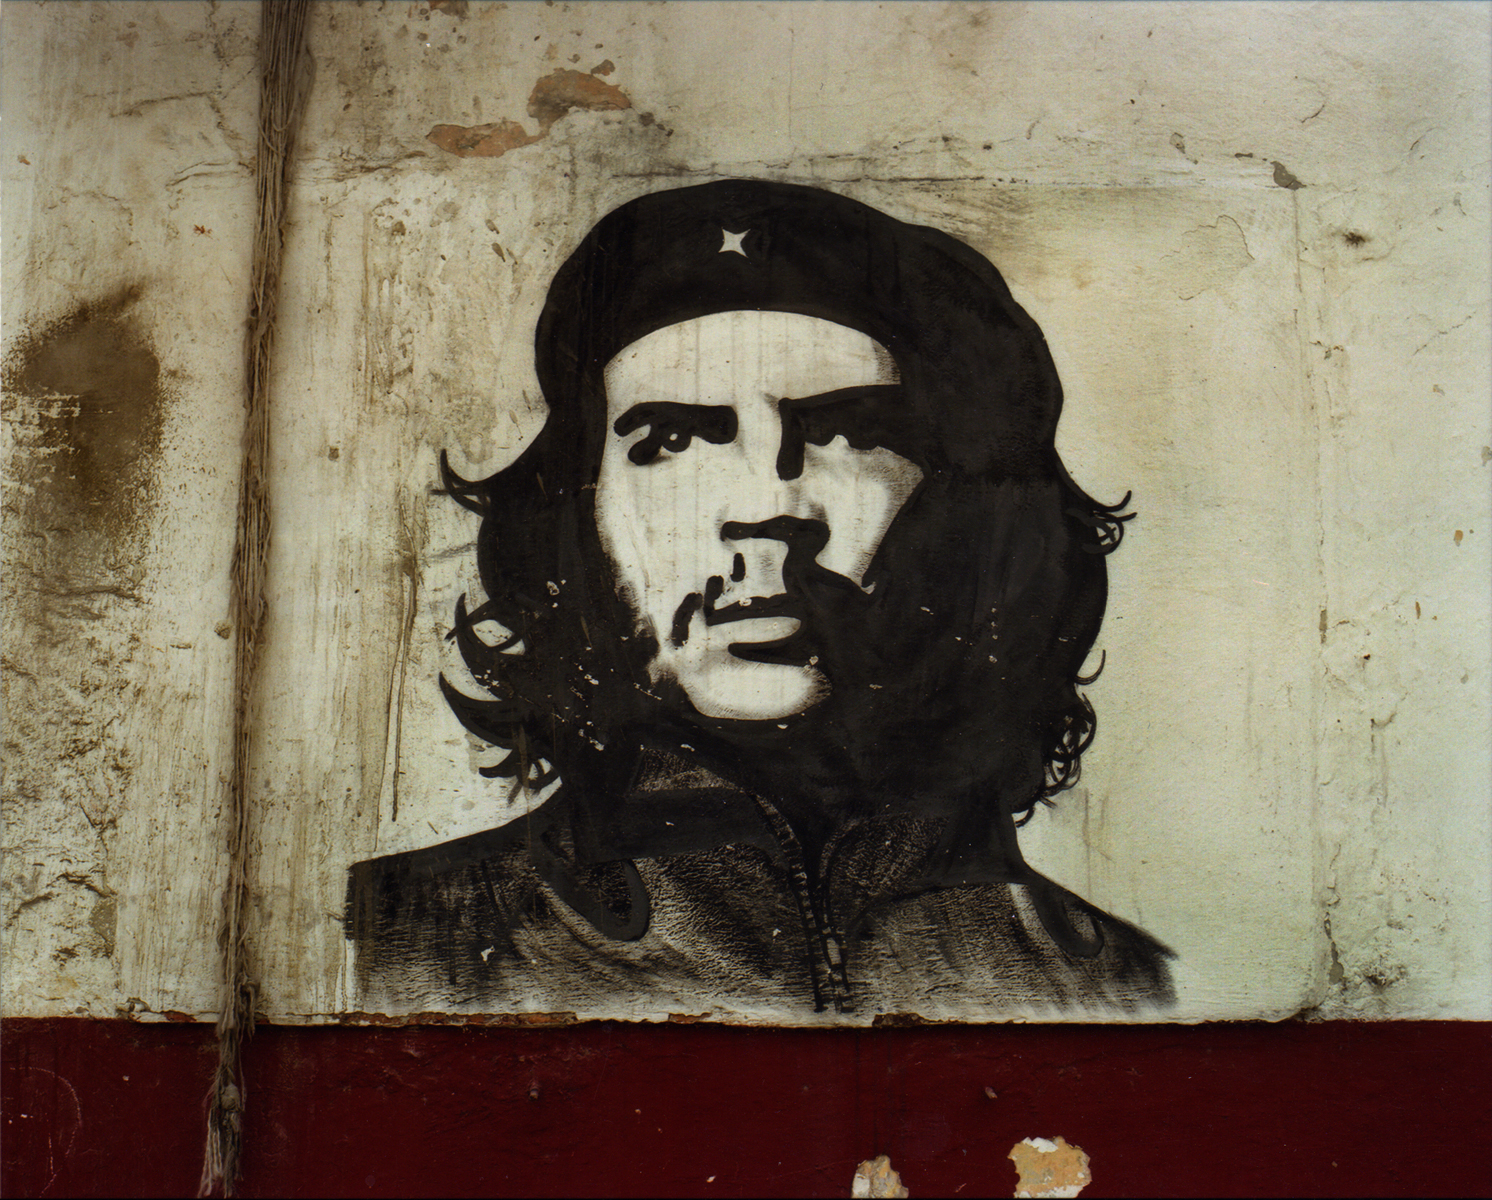 A mural of Ernesto {quote}Che{quote} Guevara was an Argentine Marxist revolutionary, physician, author, guerrilla leader, diplomat, and military theorist. He was a A major figure of the Cuban Revolution, his stylized visage has become a ubiquitous countercultural symbol of rebellion and global insignia in popular culture. Havana, Cuba